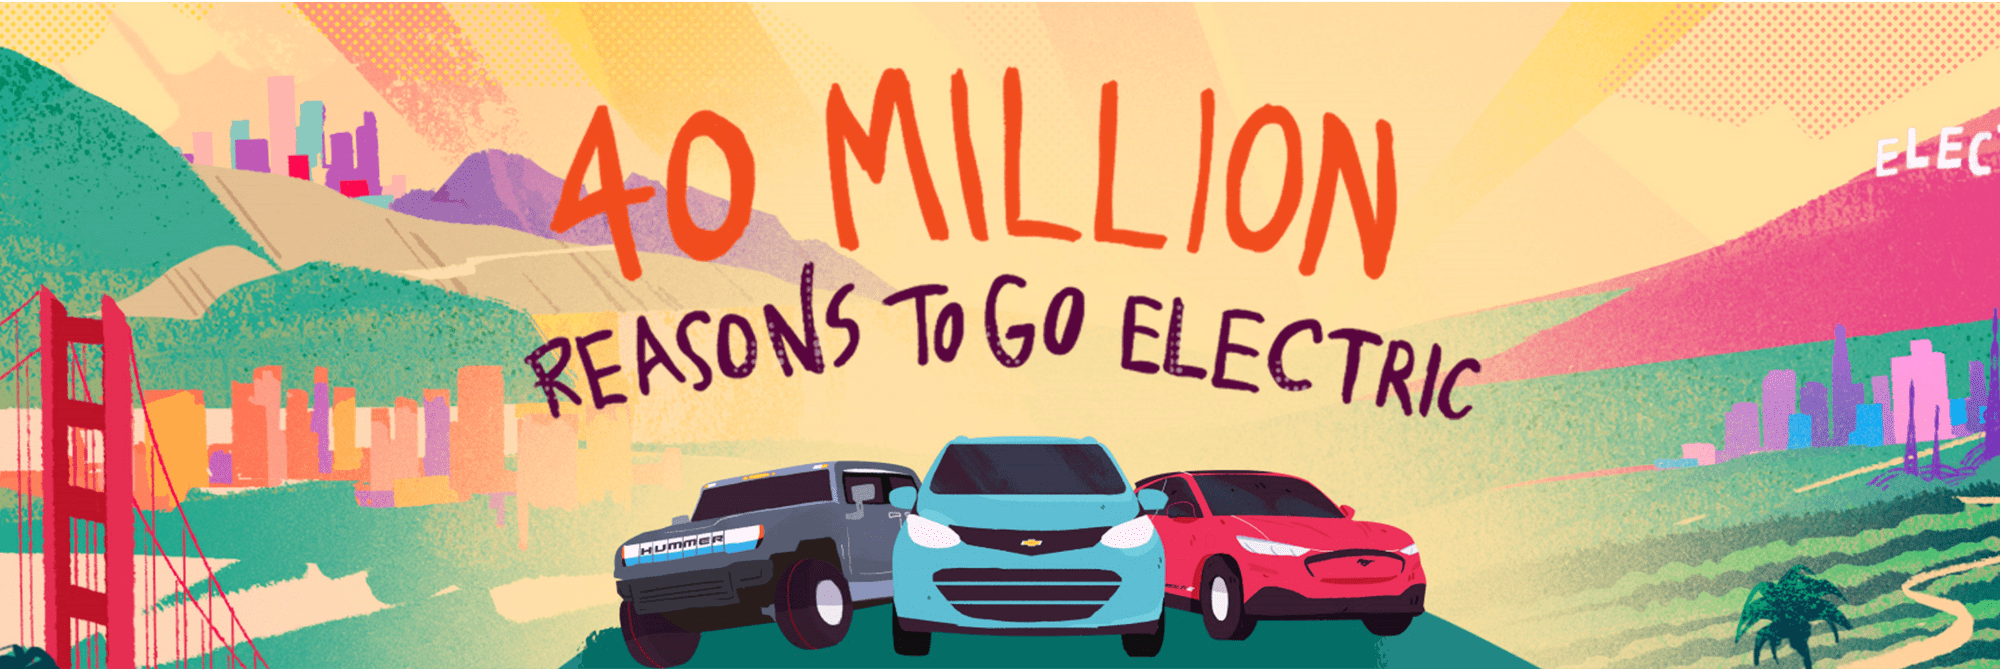 40 Million Reasons To Go Electric Page Banner